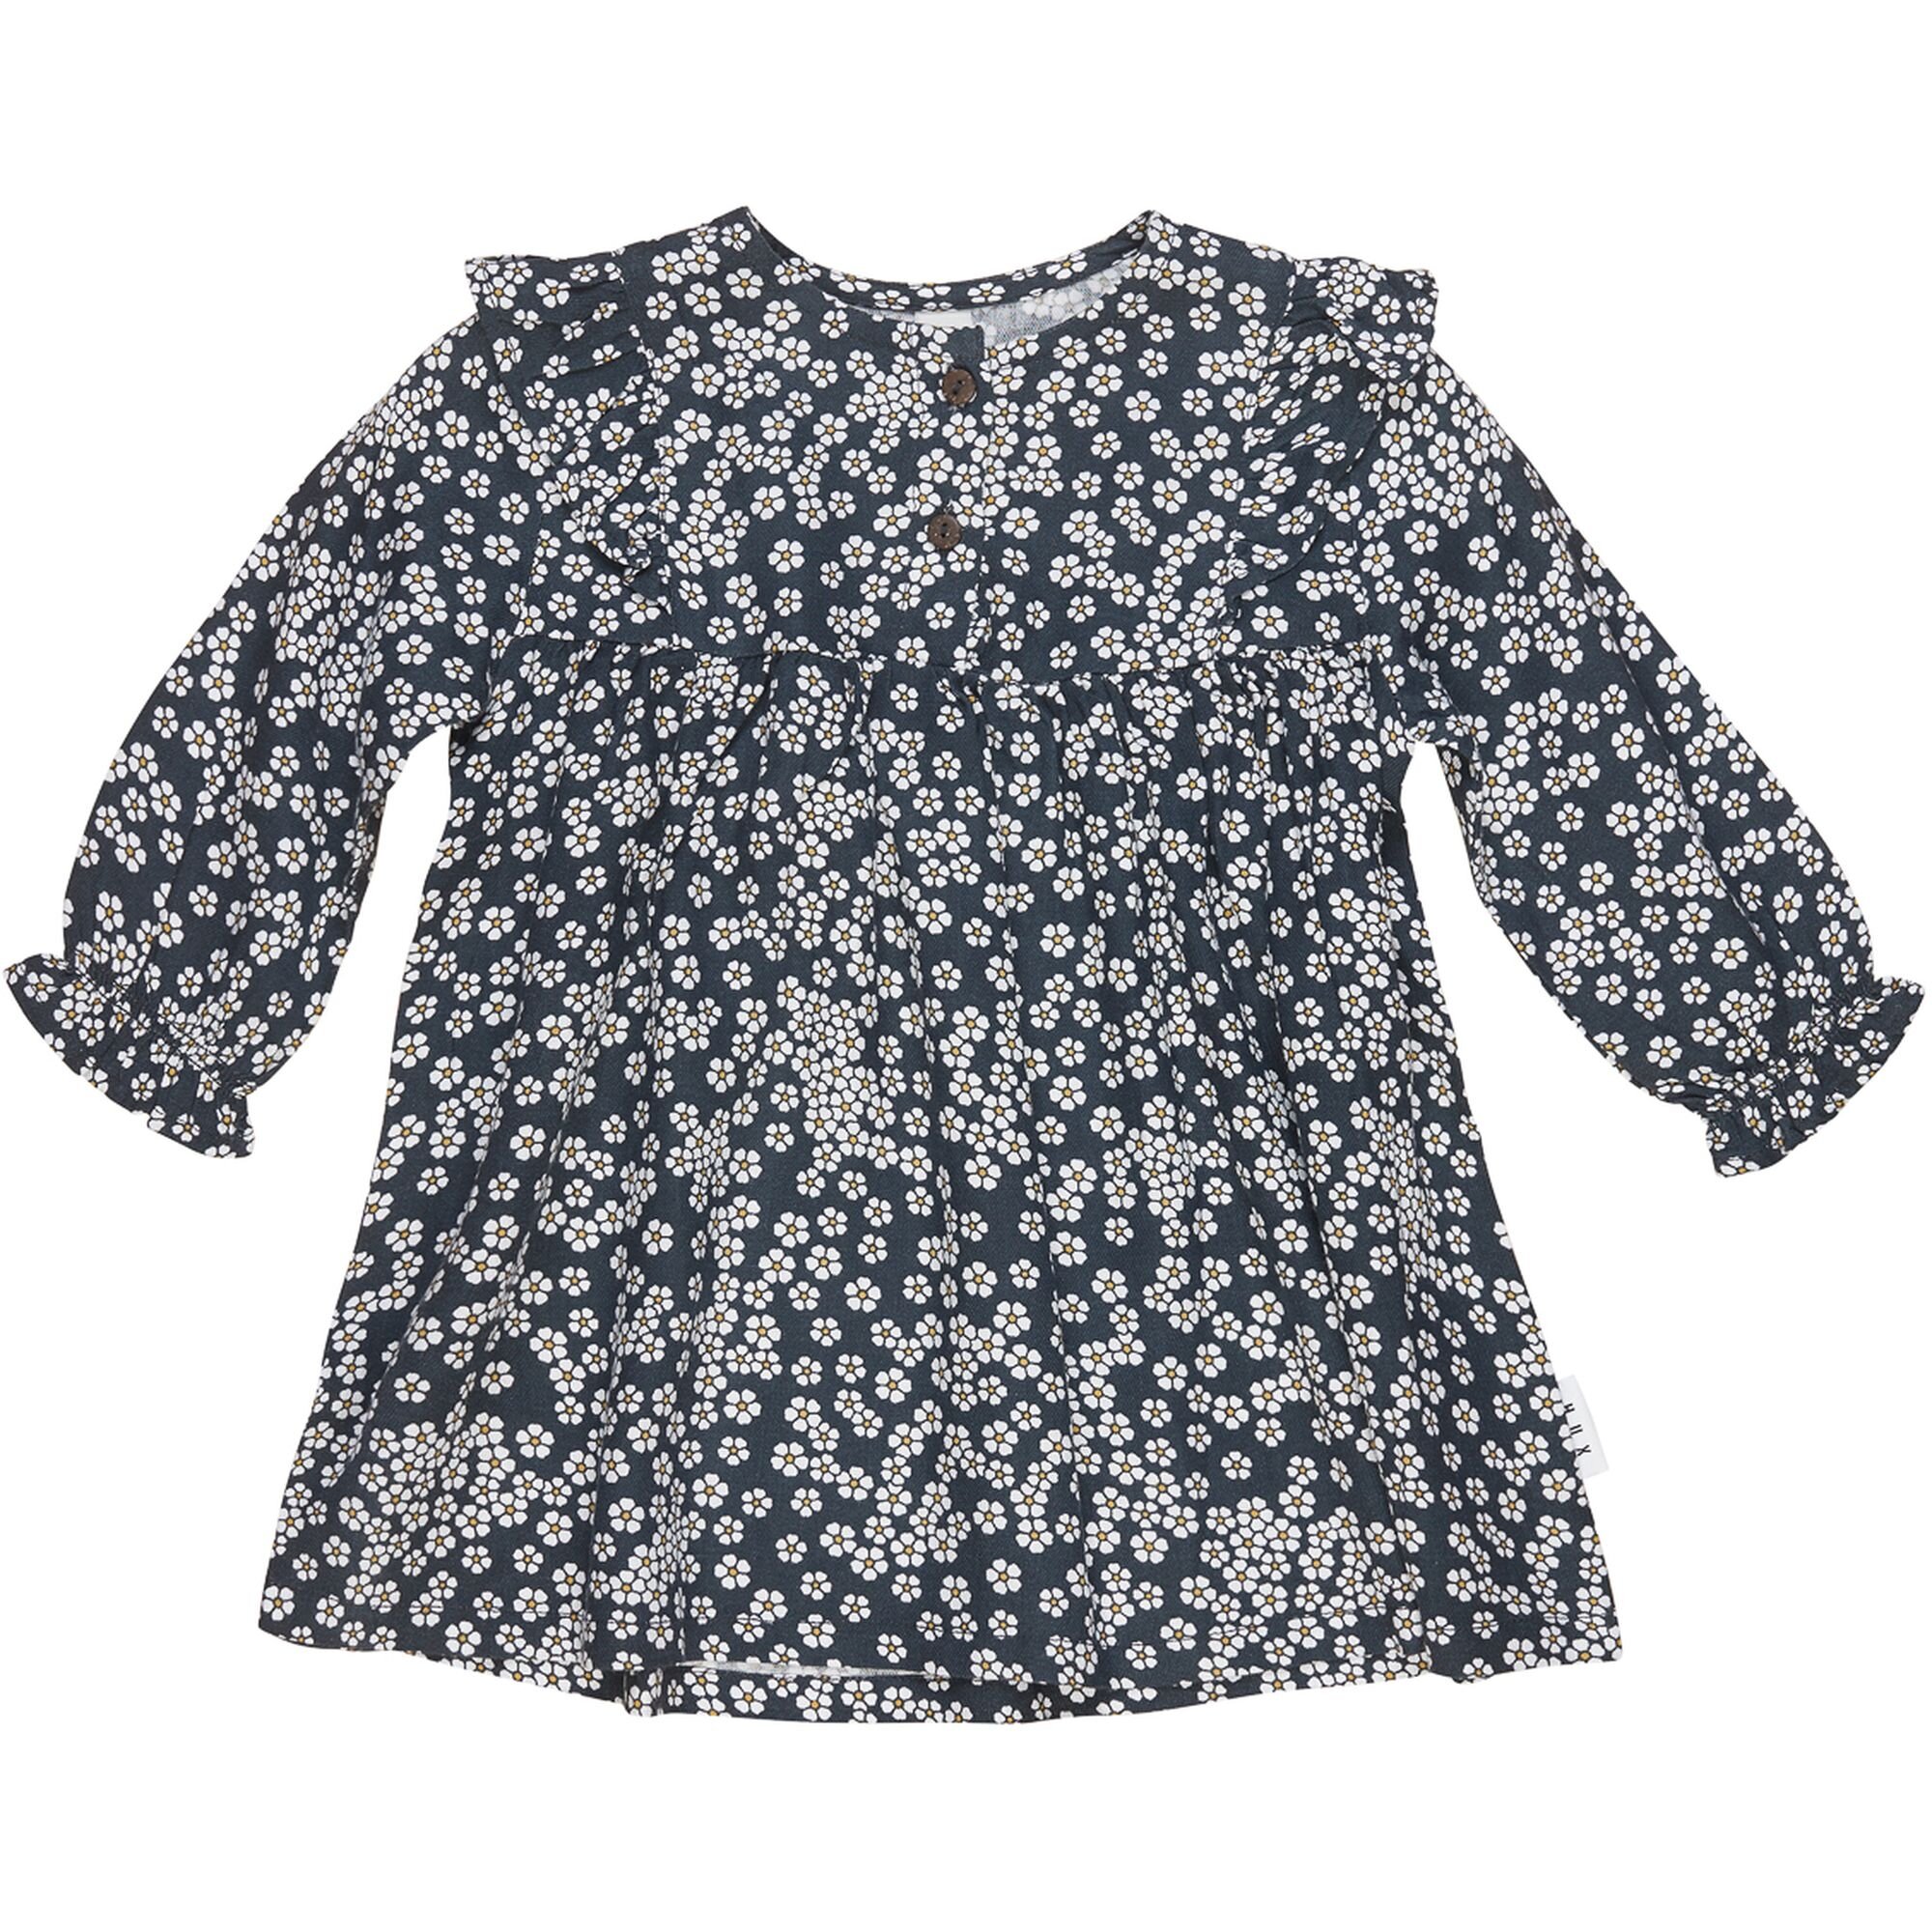 Huxbaby Floral Frill Dress - CLOTHING-BABY-Baby Dresses : Kids Clothing ...